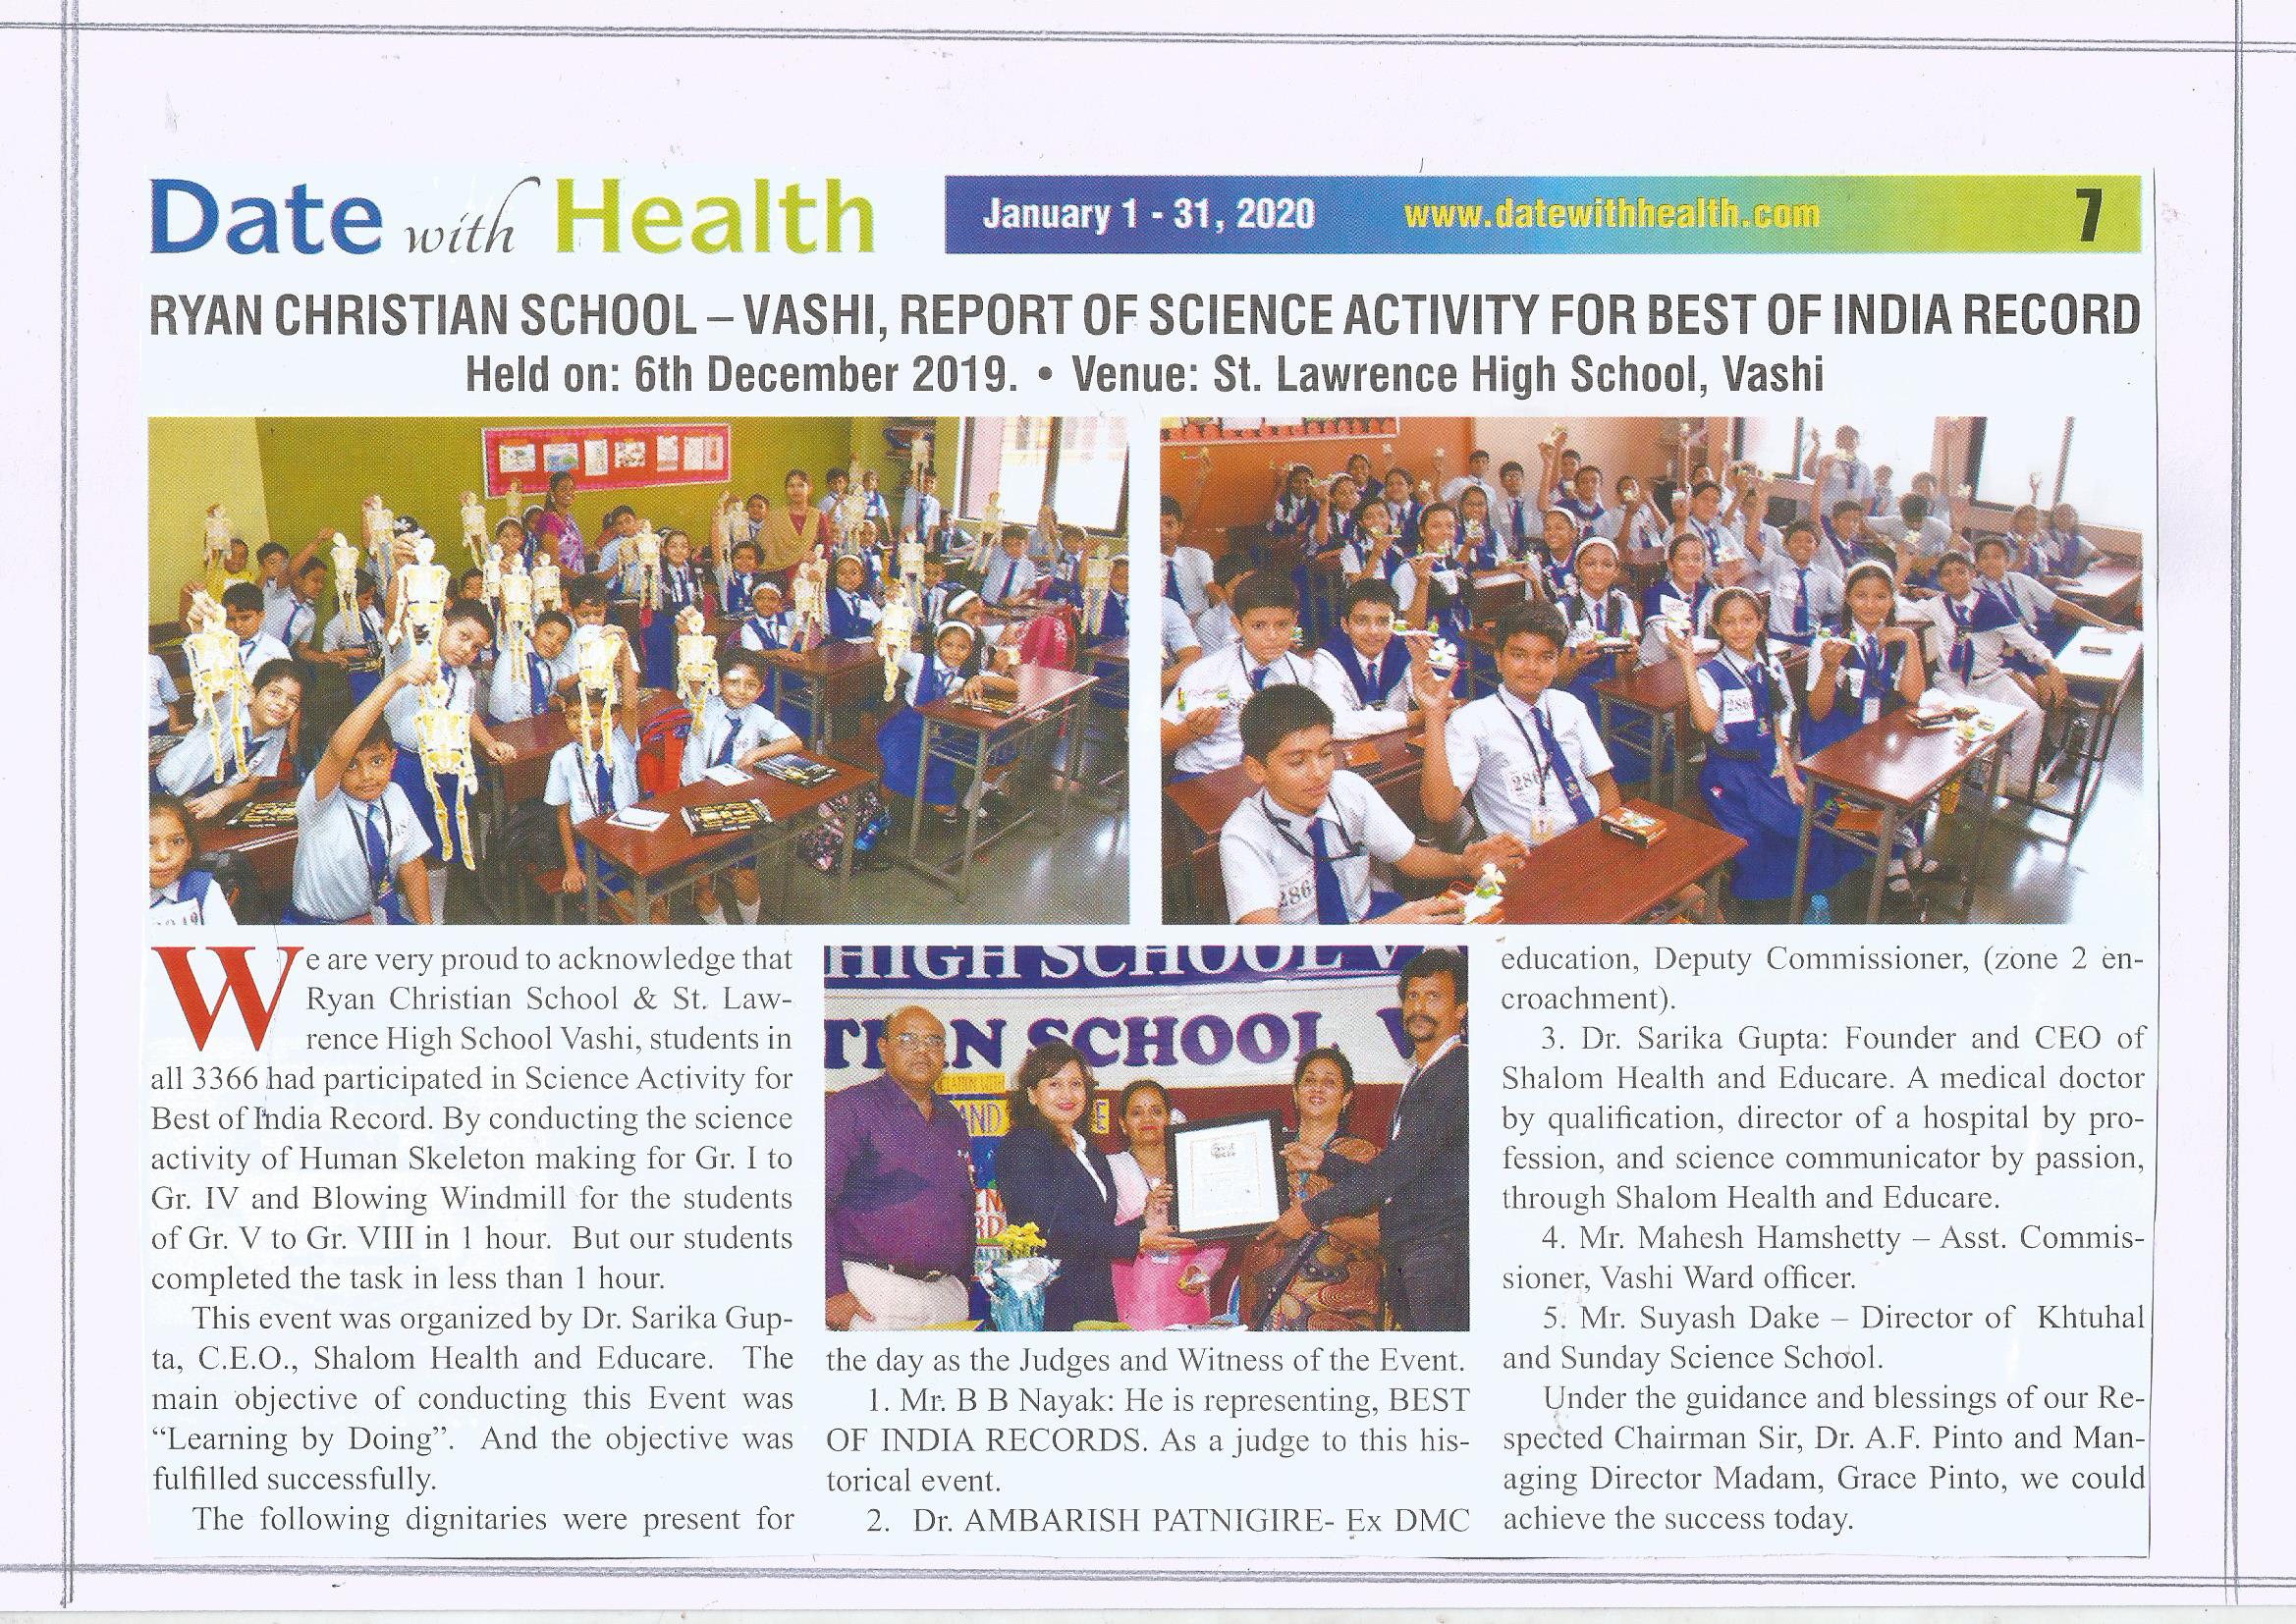 Best of India Record (Science) was featured in Date with Health